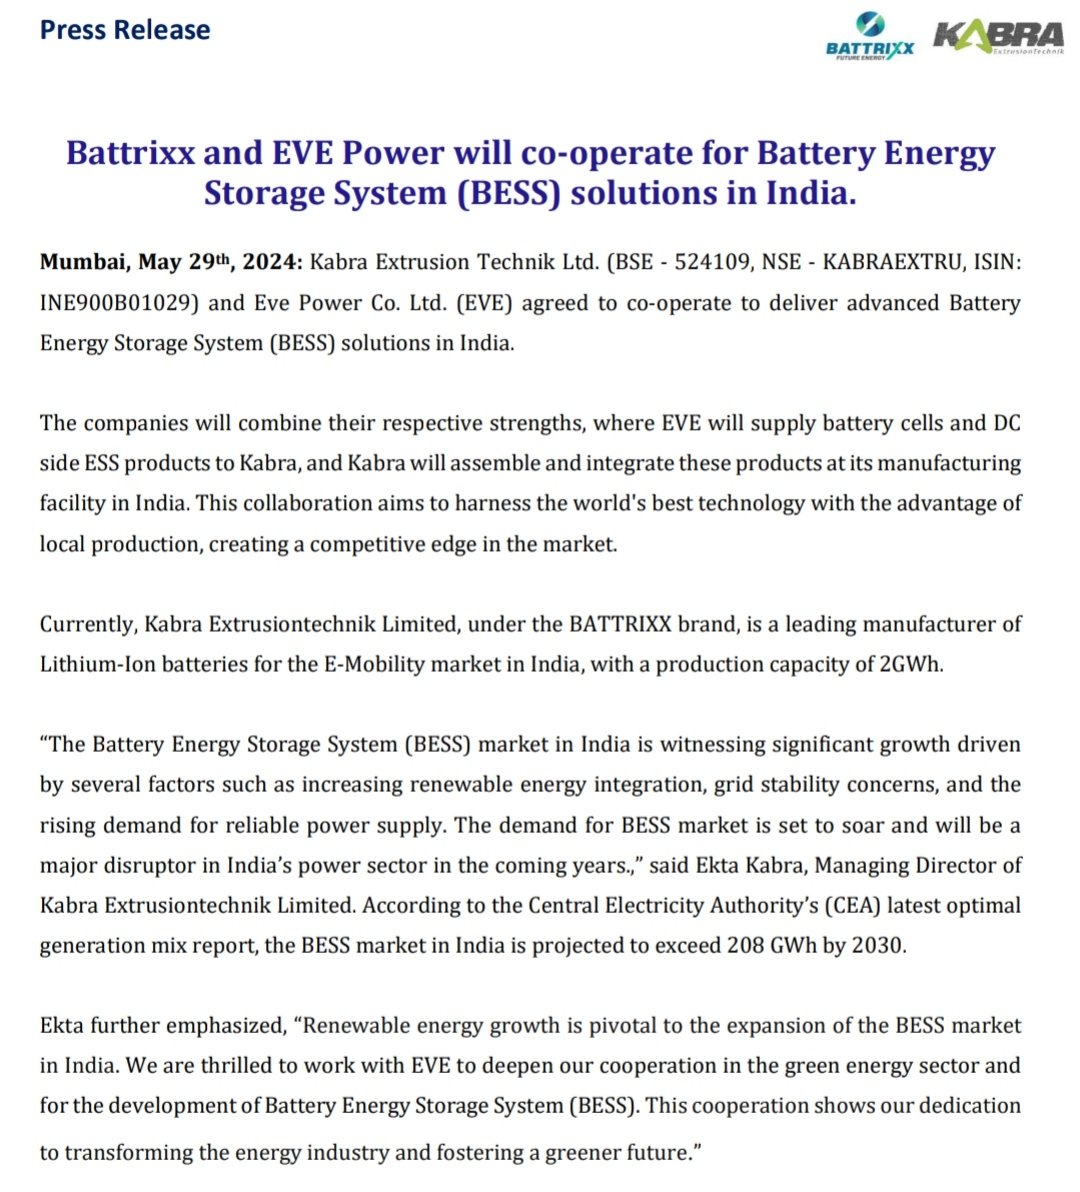 Kabra extrusiontechnik
Battrixx joins hands with EVE power for BESS solutions in India.
Welcome move
If you track WAREE TECHNOLOGIES and don't track KABRA EXTRUSION, well then you should start now.
Kabra is one of the largest lithium ion battery manufacturer for 2wheeler in india